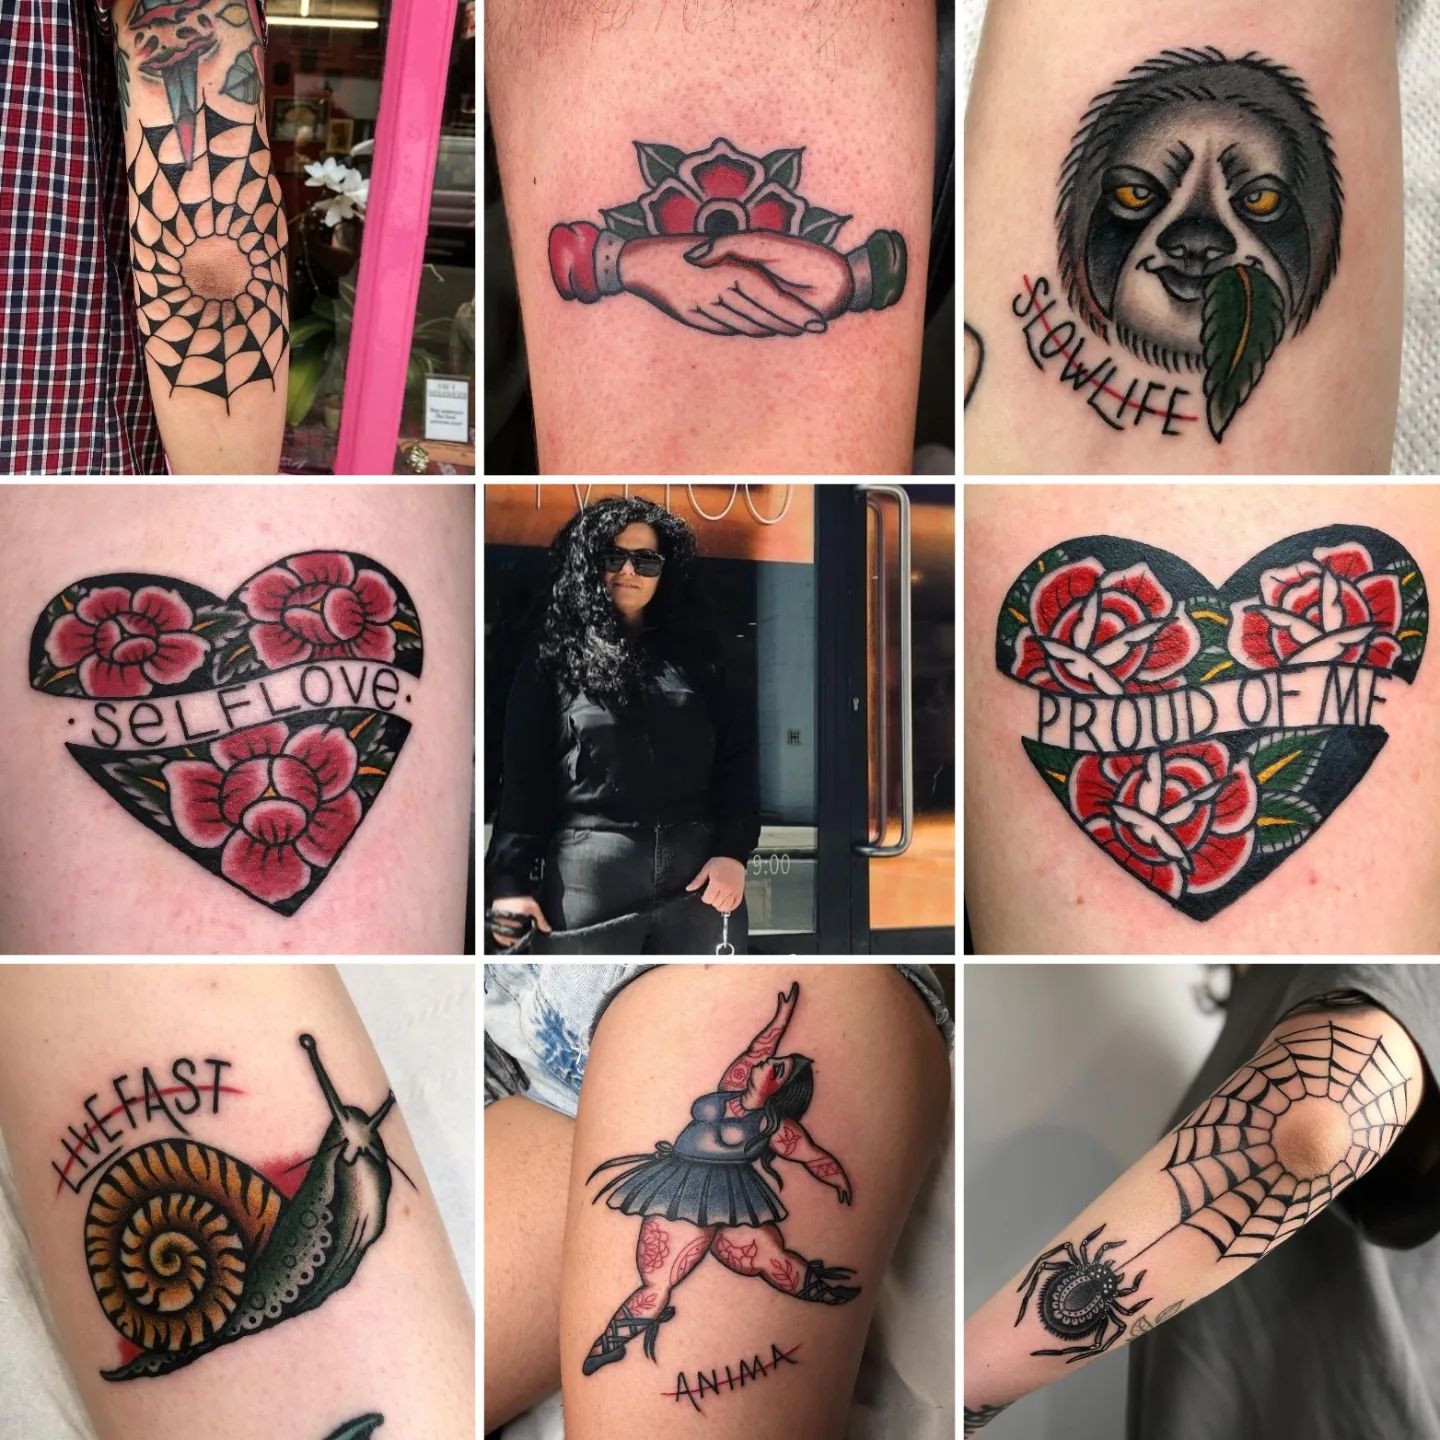 Next guest spot: Claudia Trash is back!!!!!! 2nd to 6th August, couple of gaps remaining. Enquire within!
Looking forward to seeing you again Claudia!!
claudia_trash 
       